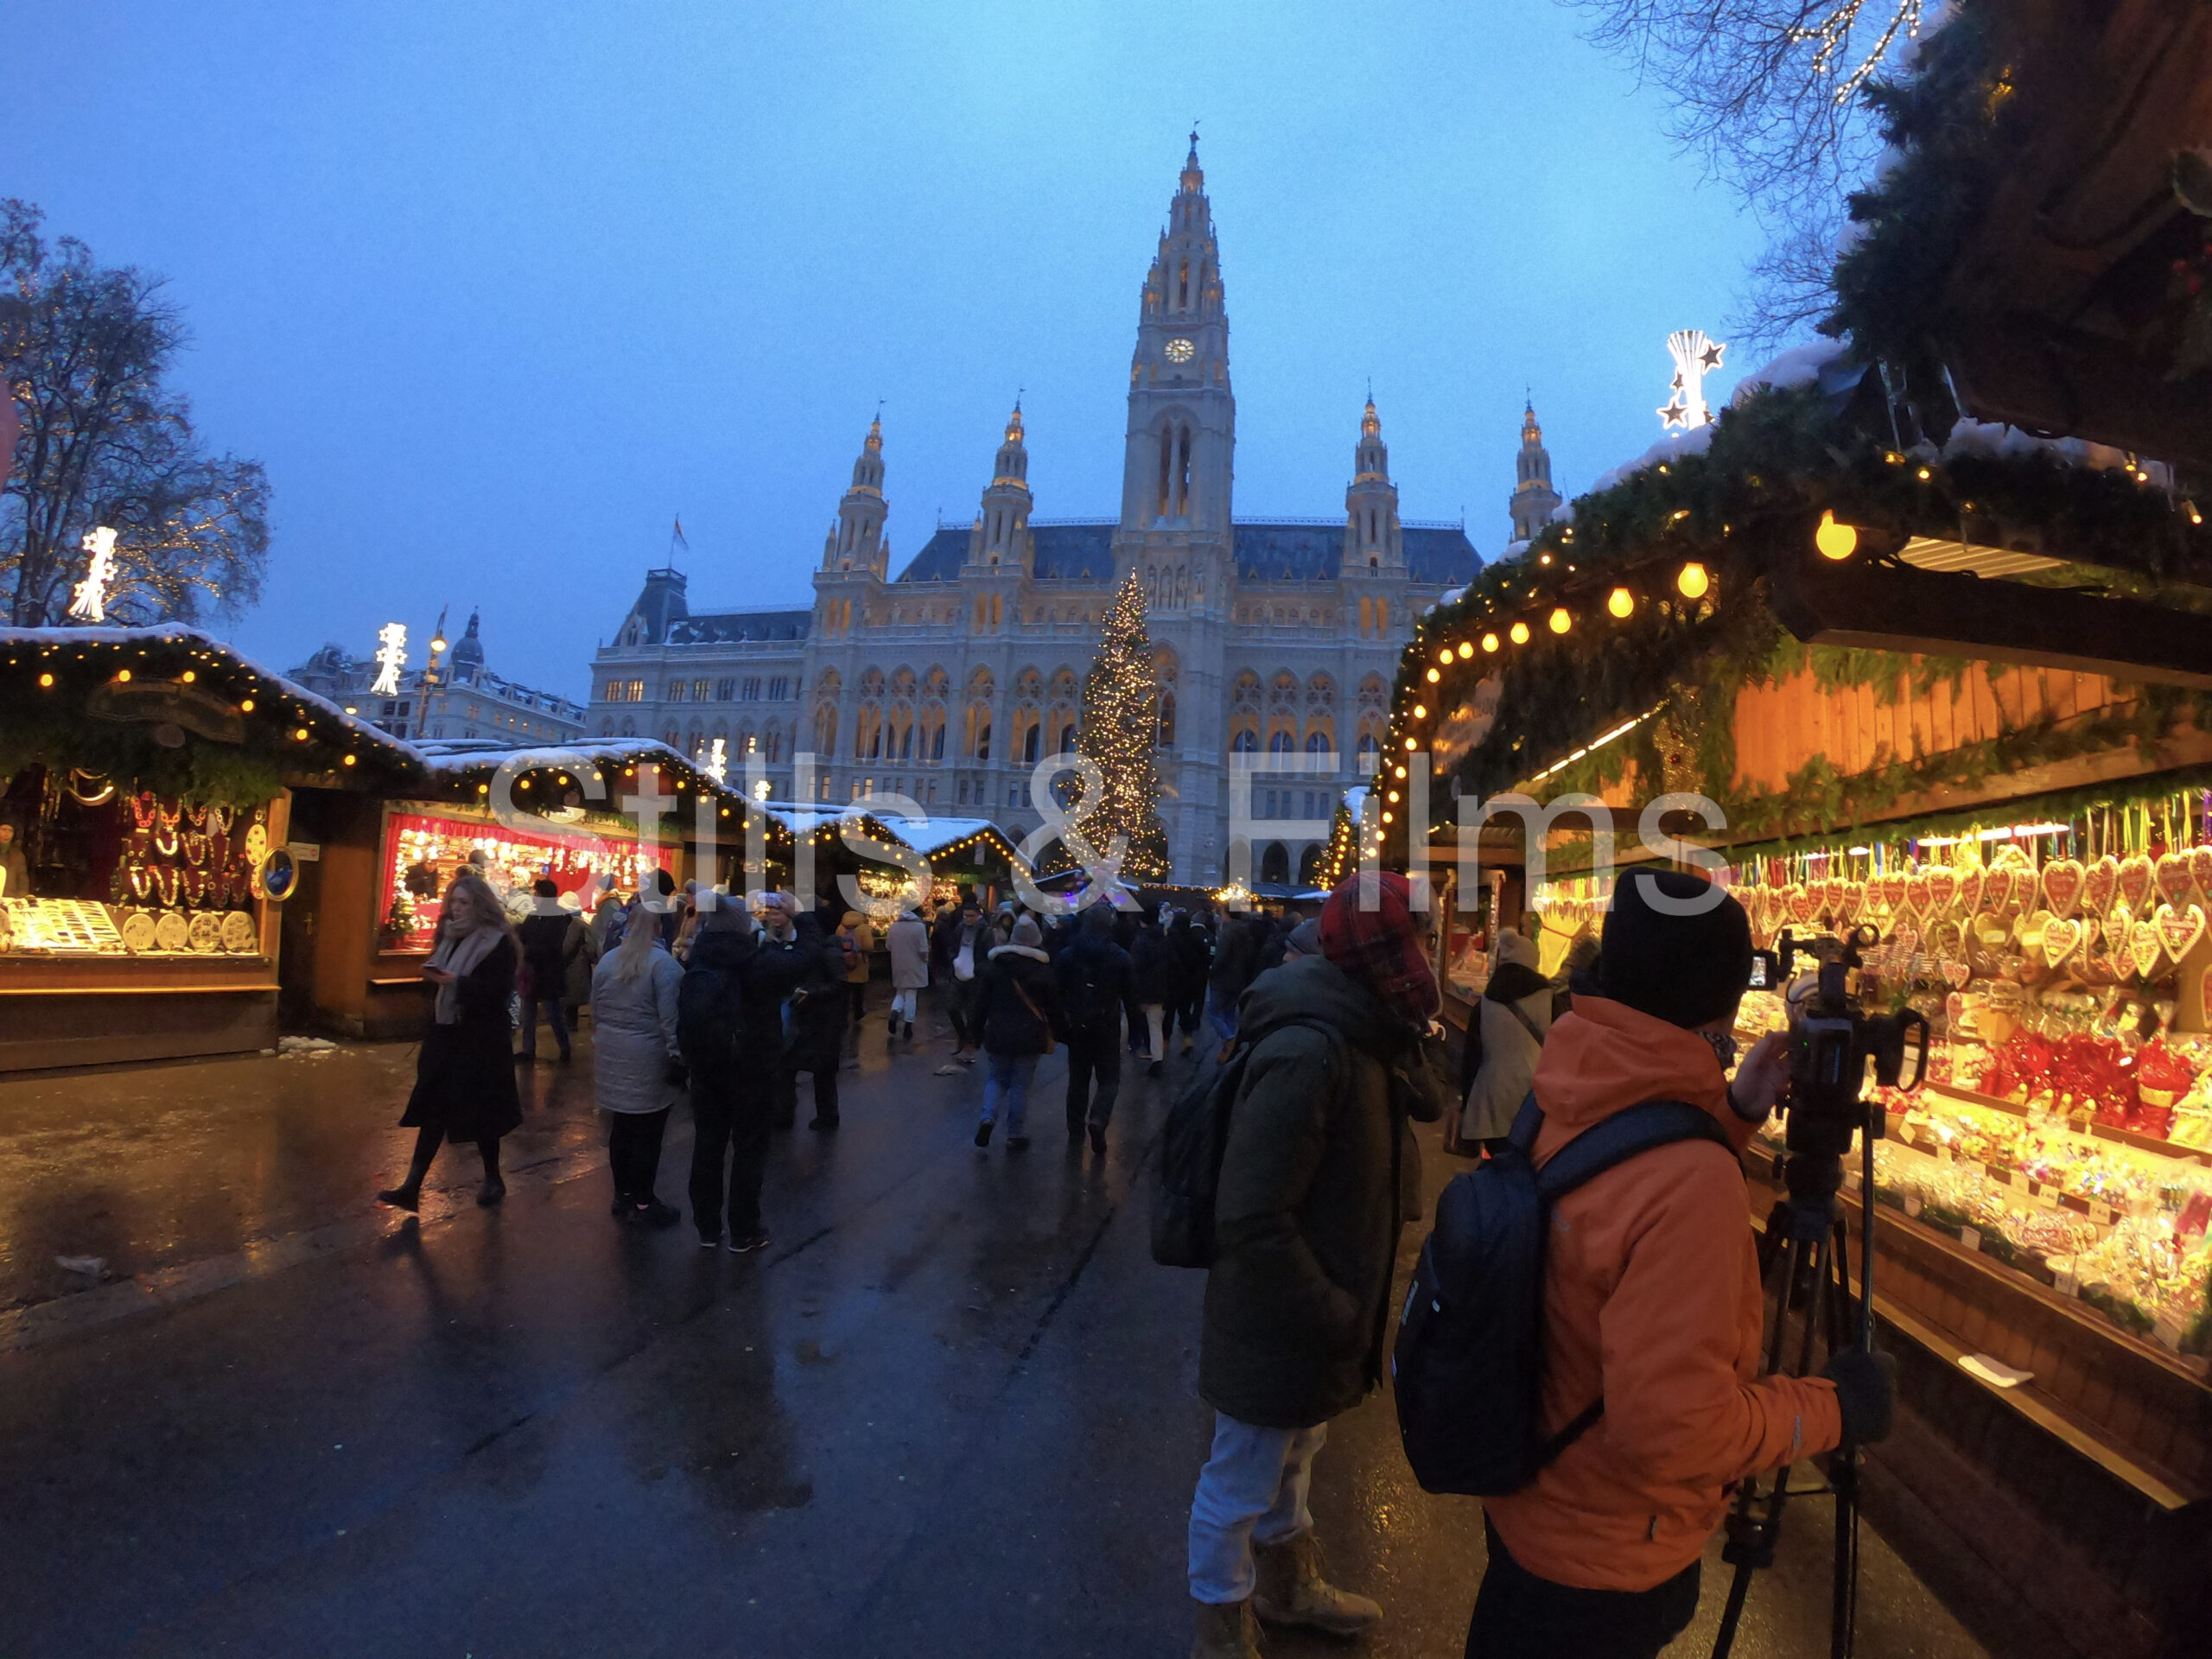 Bustling Christmas market in Vienna in front of the Vienna City Hall